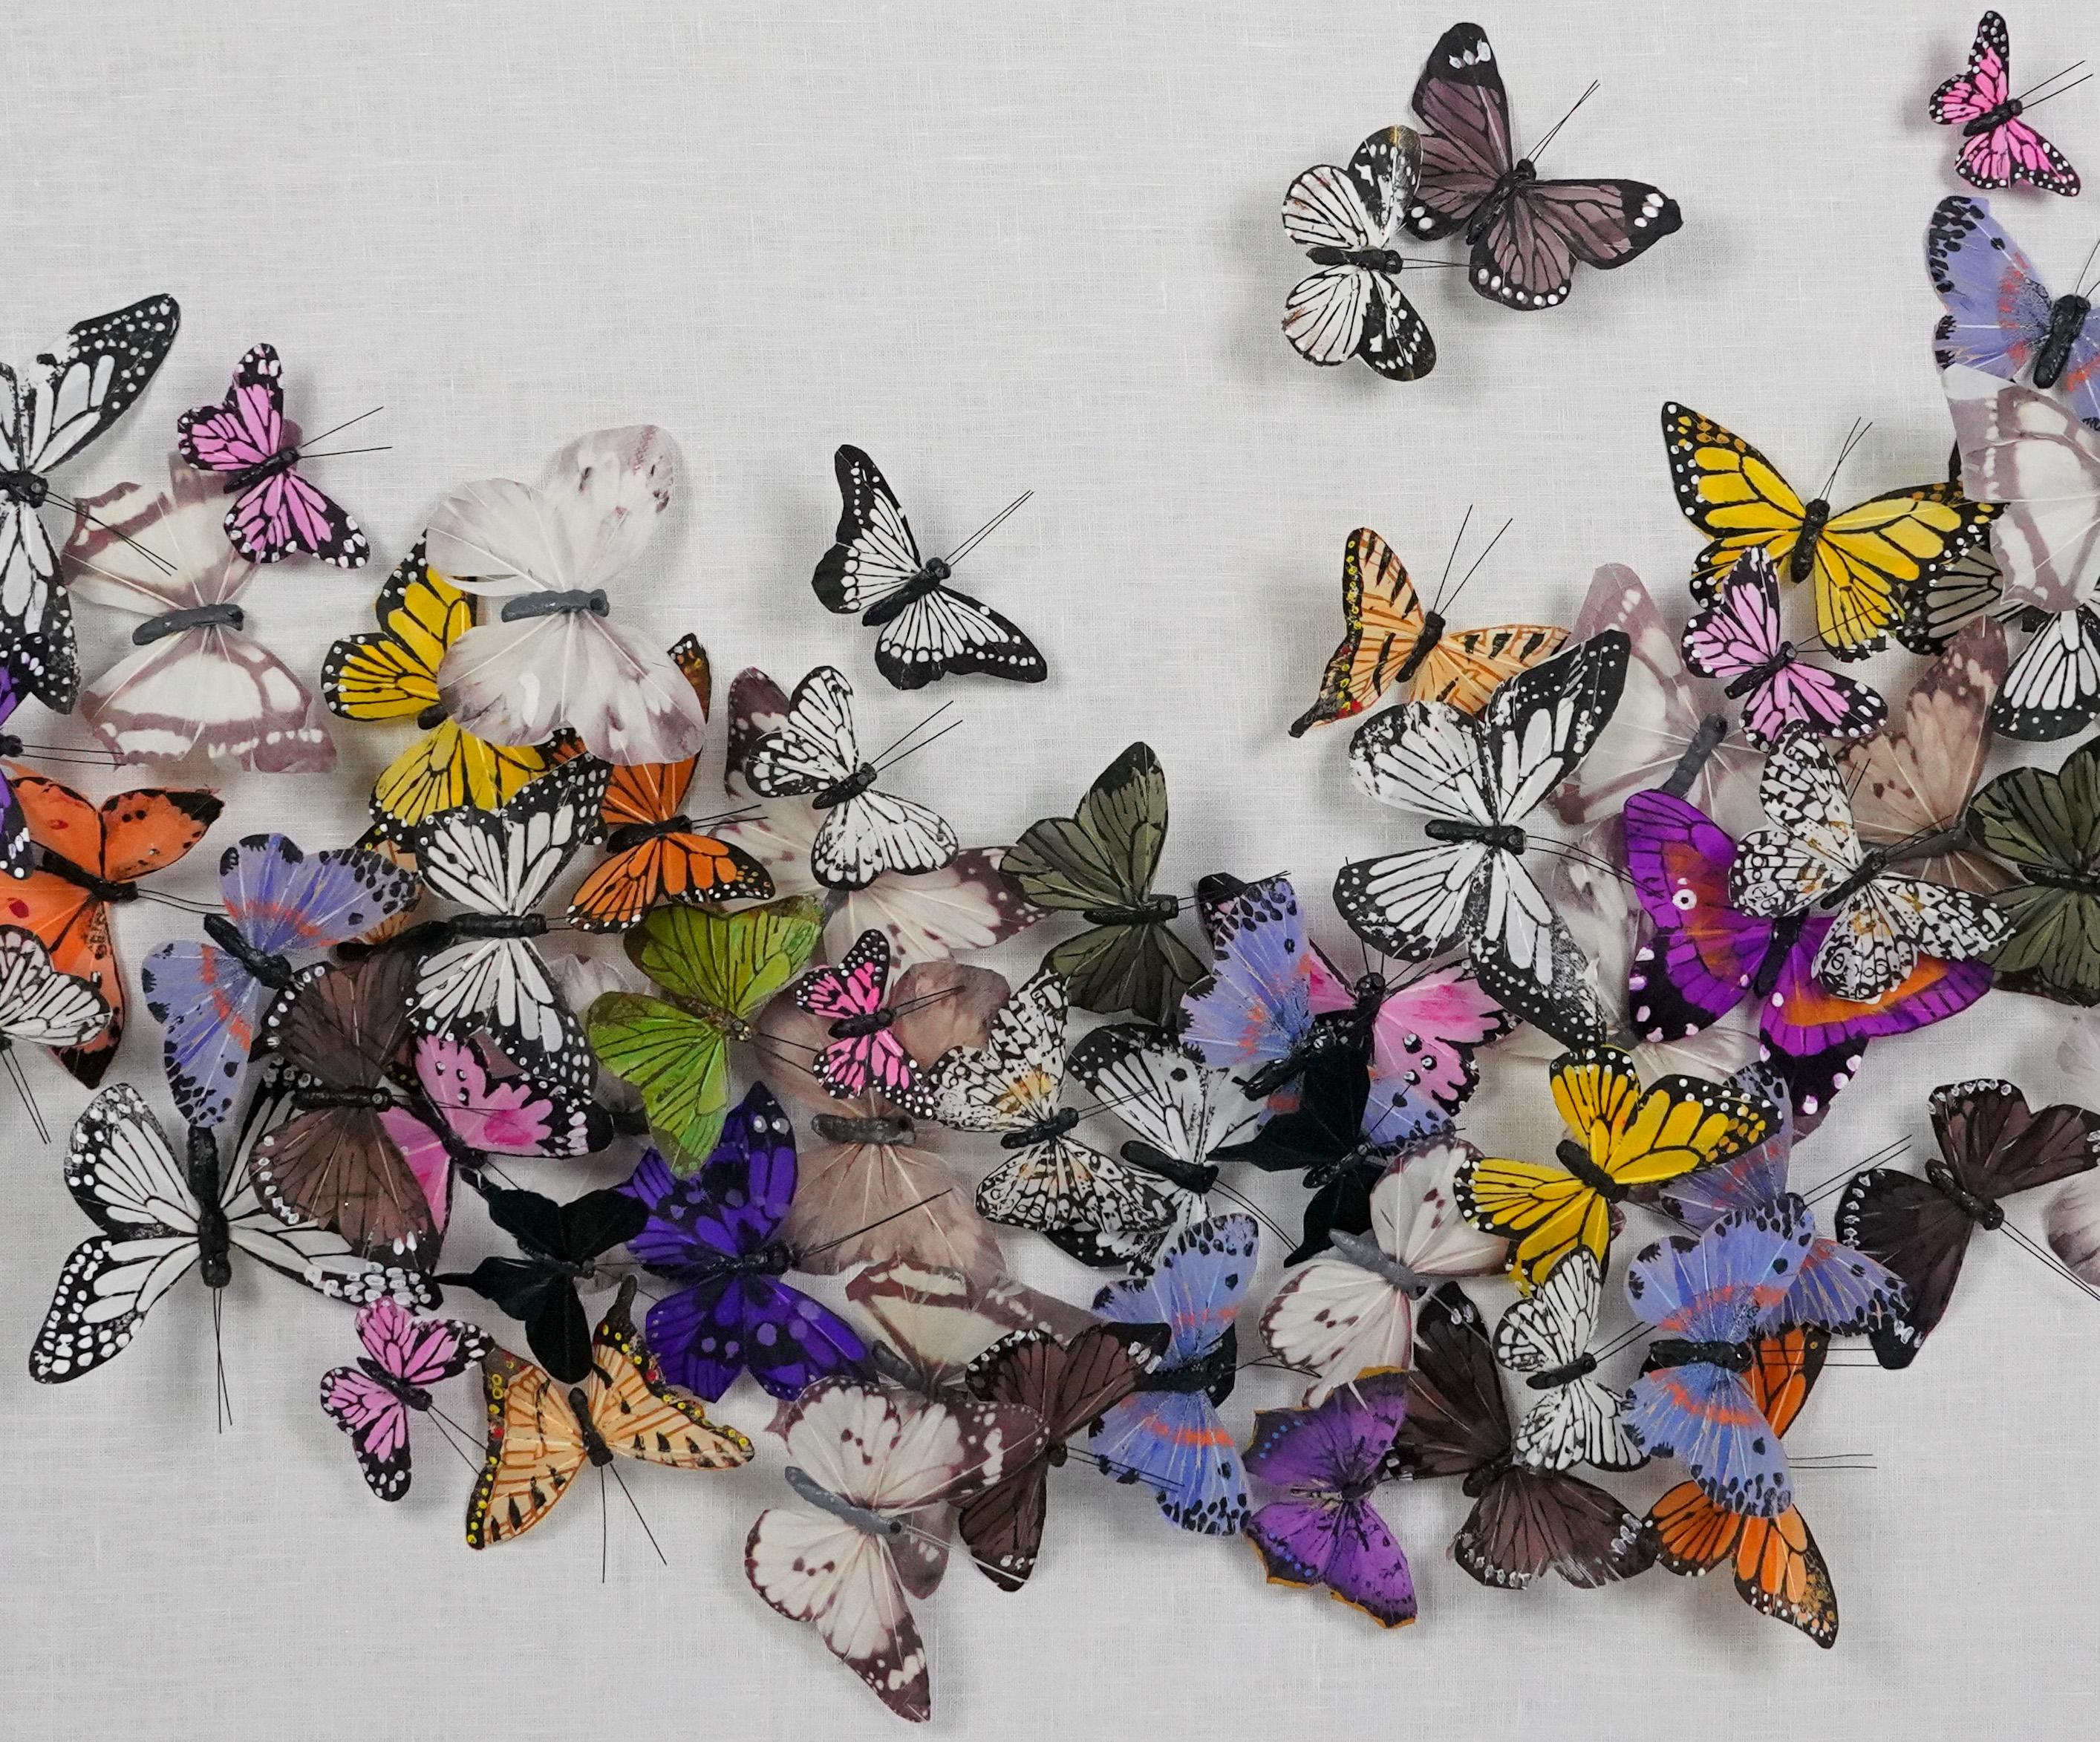 Juan Carlos Collada creates fantastical compositions filled with dozens of colorful, and perfectly symmetrical, butterflies. He constructs the butterflies with hand-painted silk and assembles them against a linen background. The butterflies flock